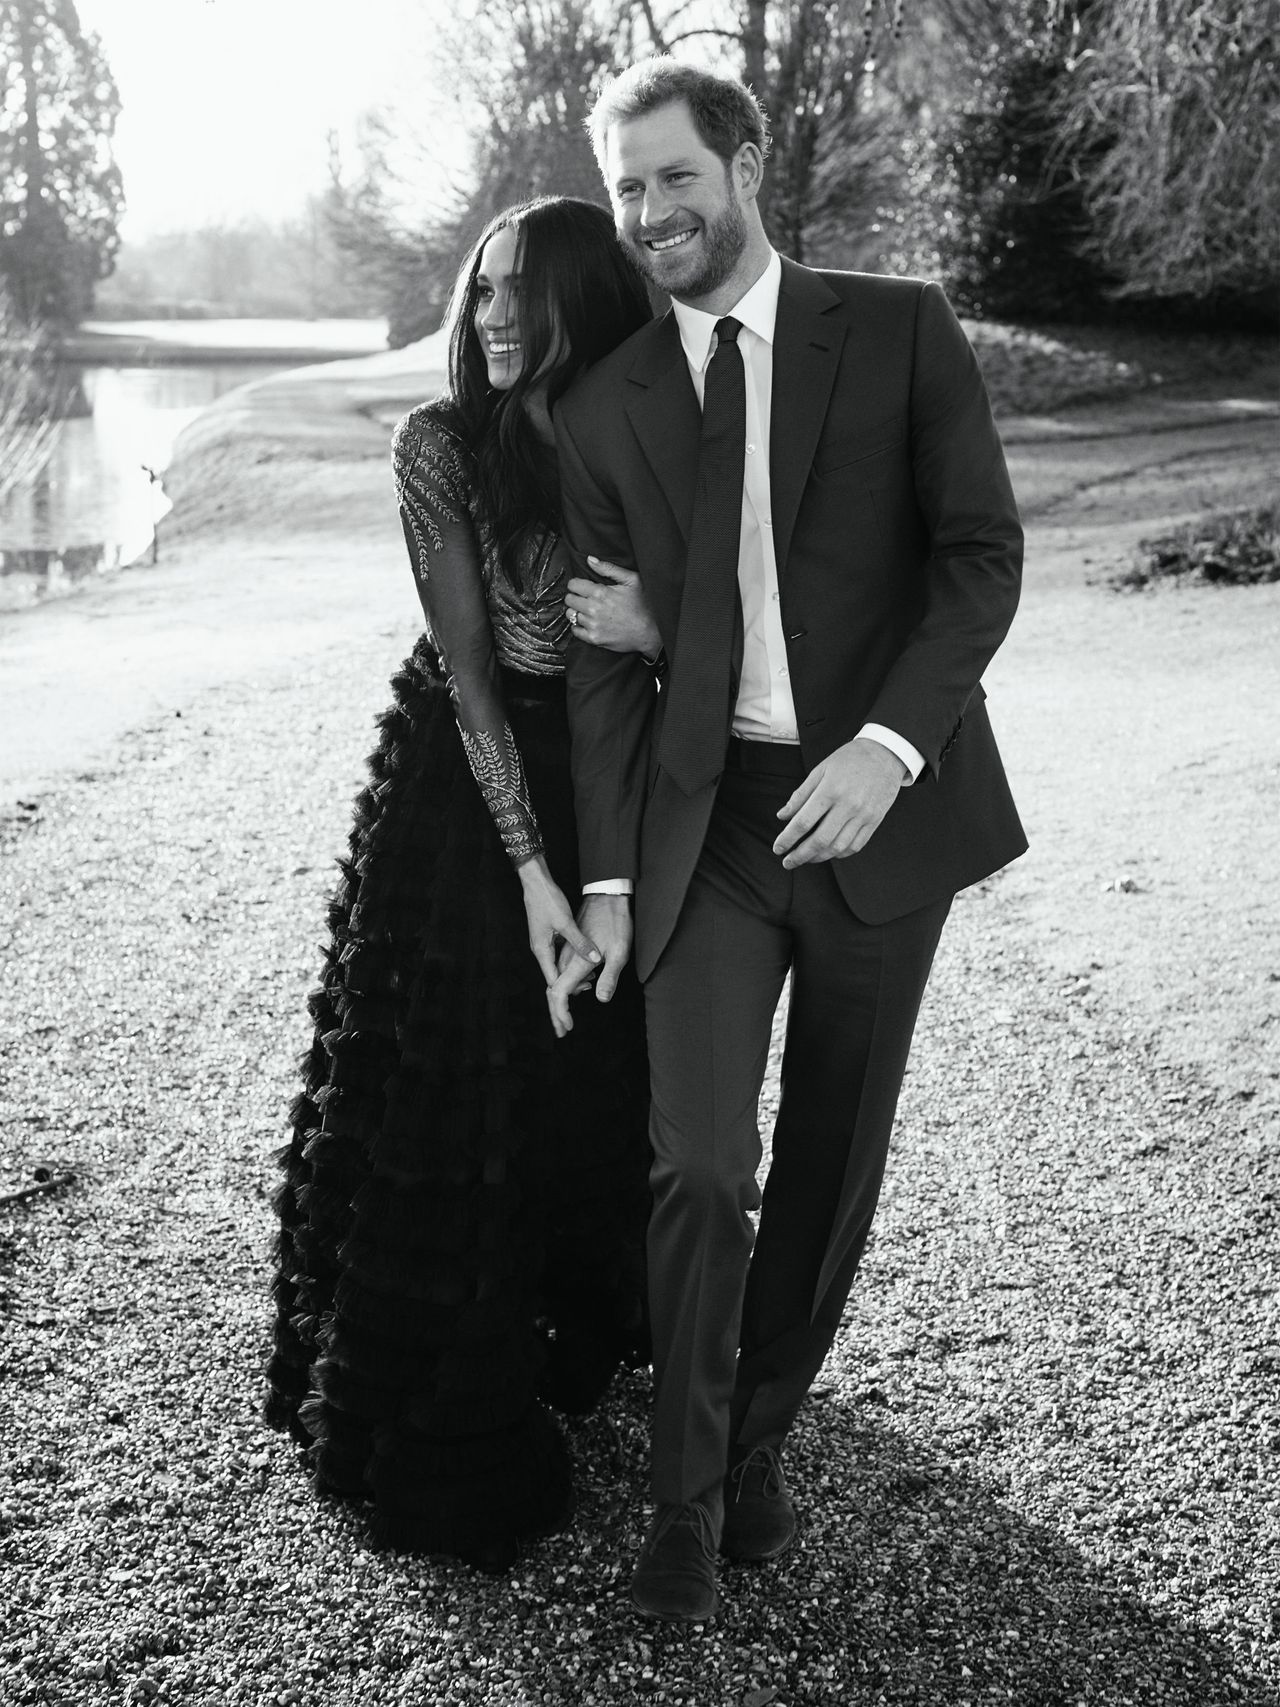 Meghan Markle wore a Ralph & Russo gown in her engagement photos 